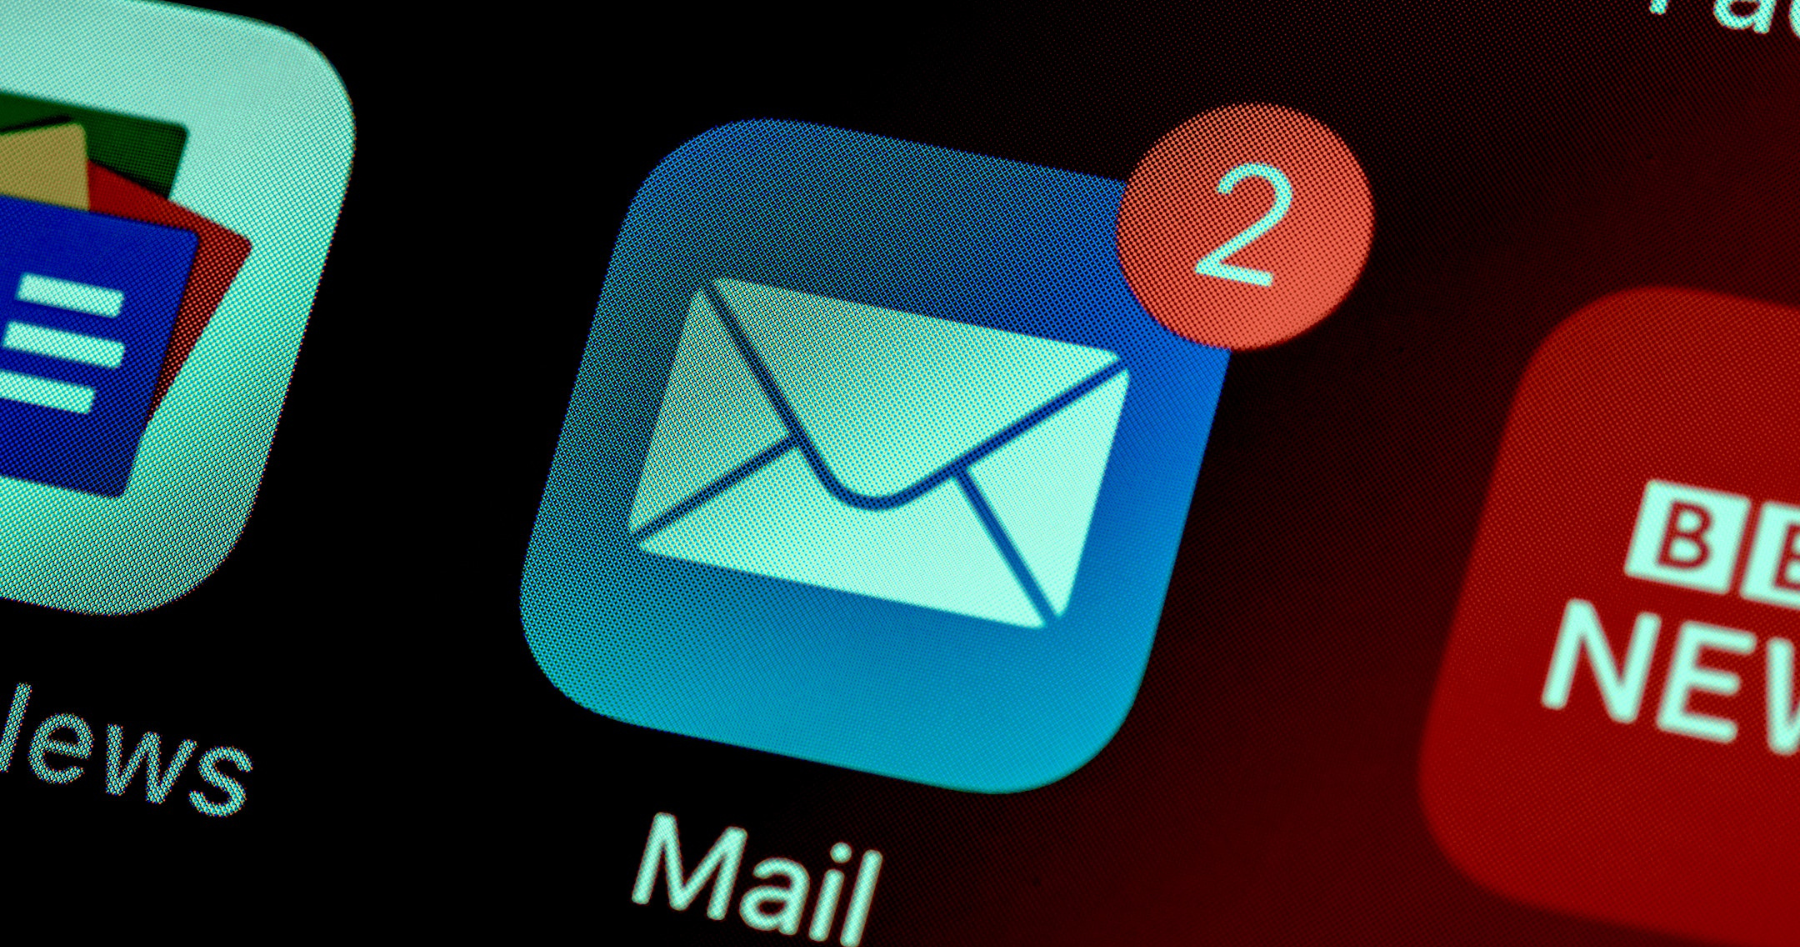 The 8 Best Email Security Best Practices For Your Business to Follow